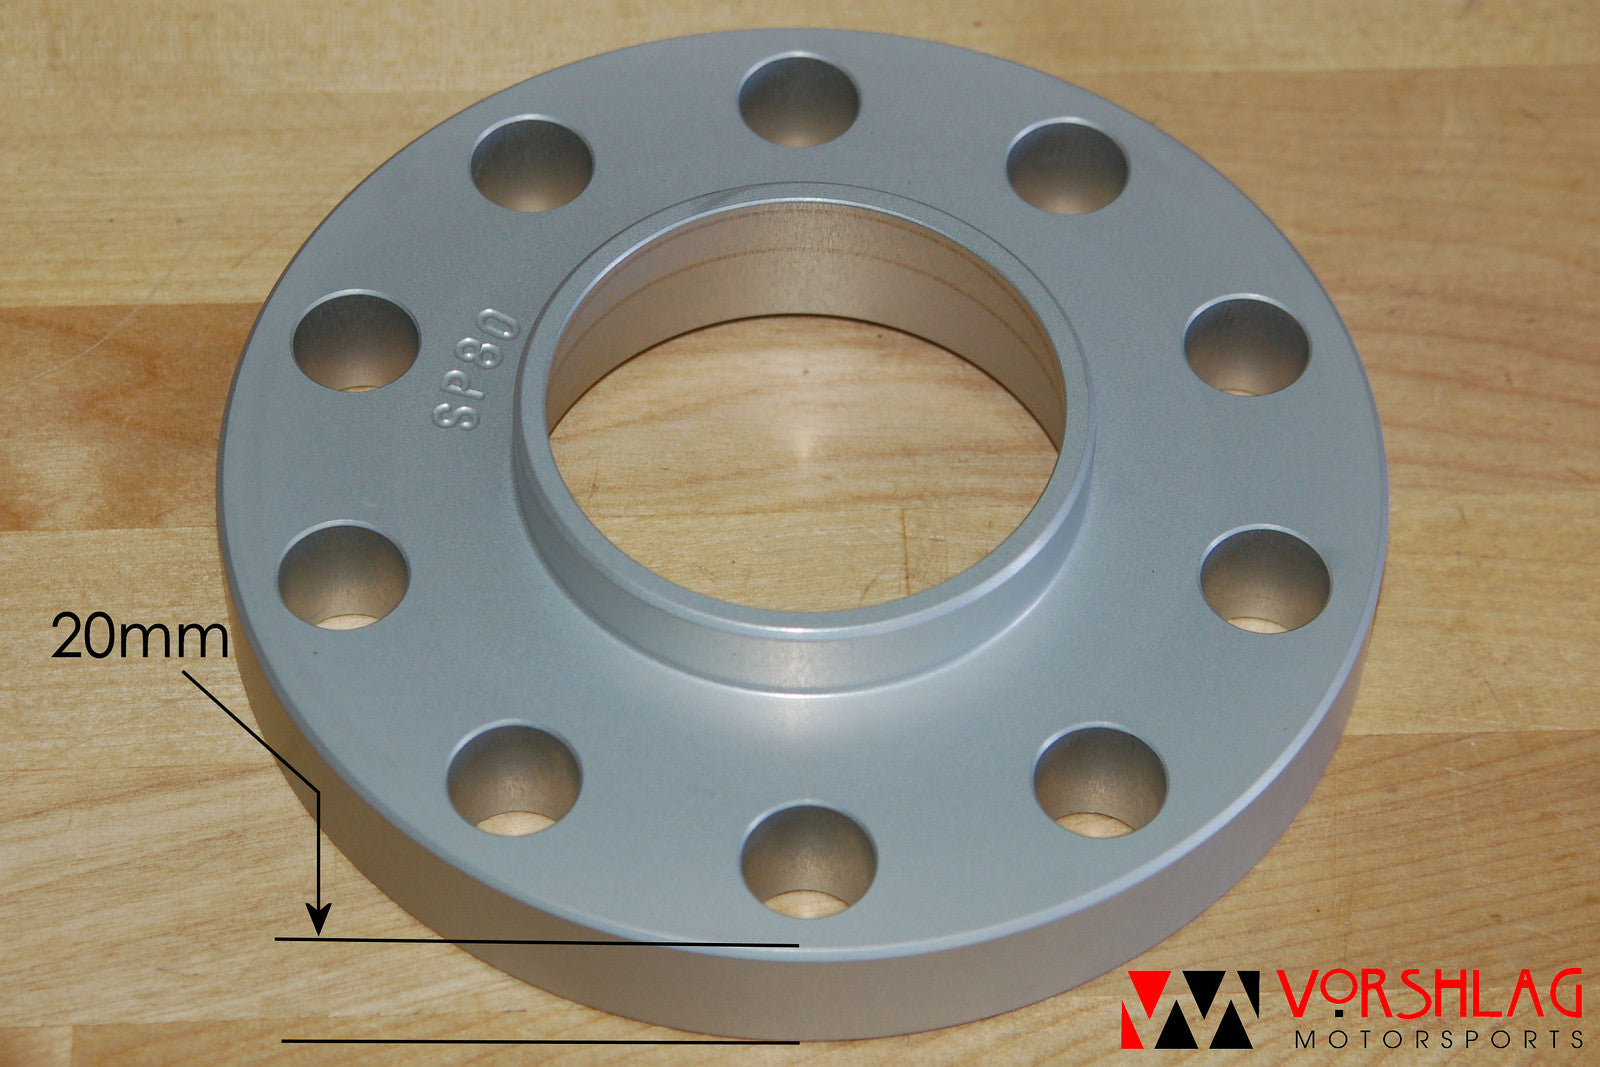 Steering wheel spacer for BMW 3 Series and M3 E46